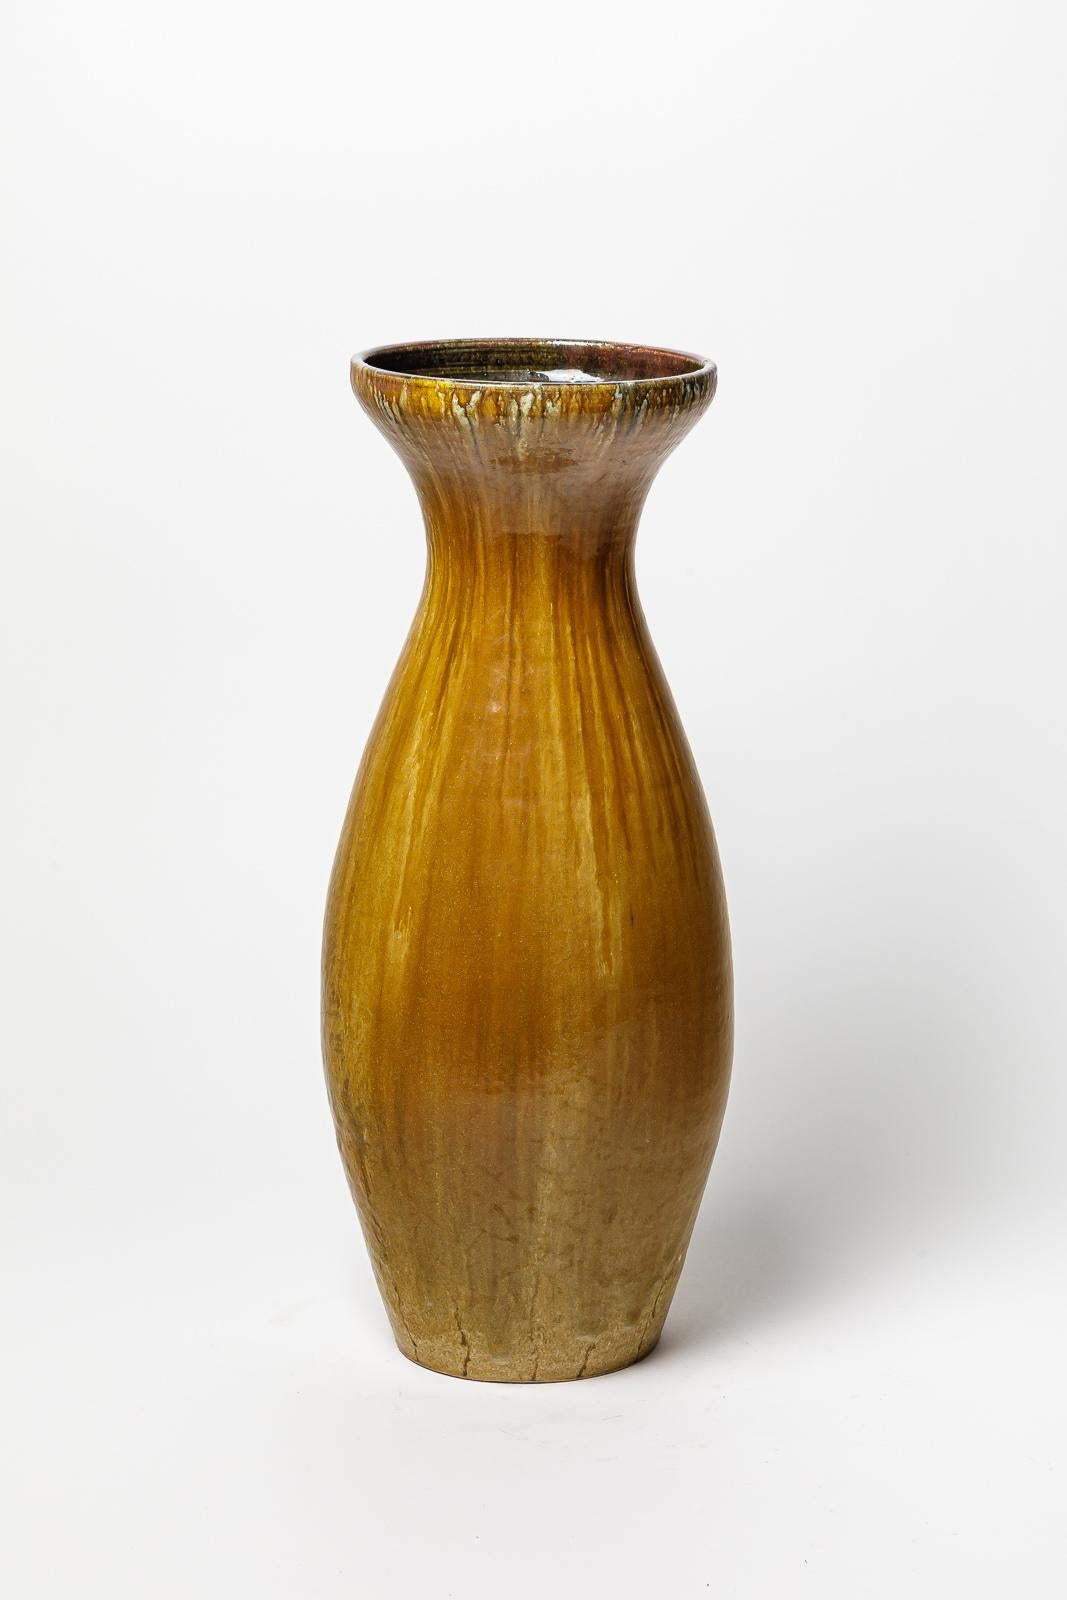 French Set of ocher, brown and white glazed stoneware vases by Accolay, circa 1960-70. For Sale